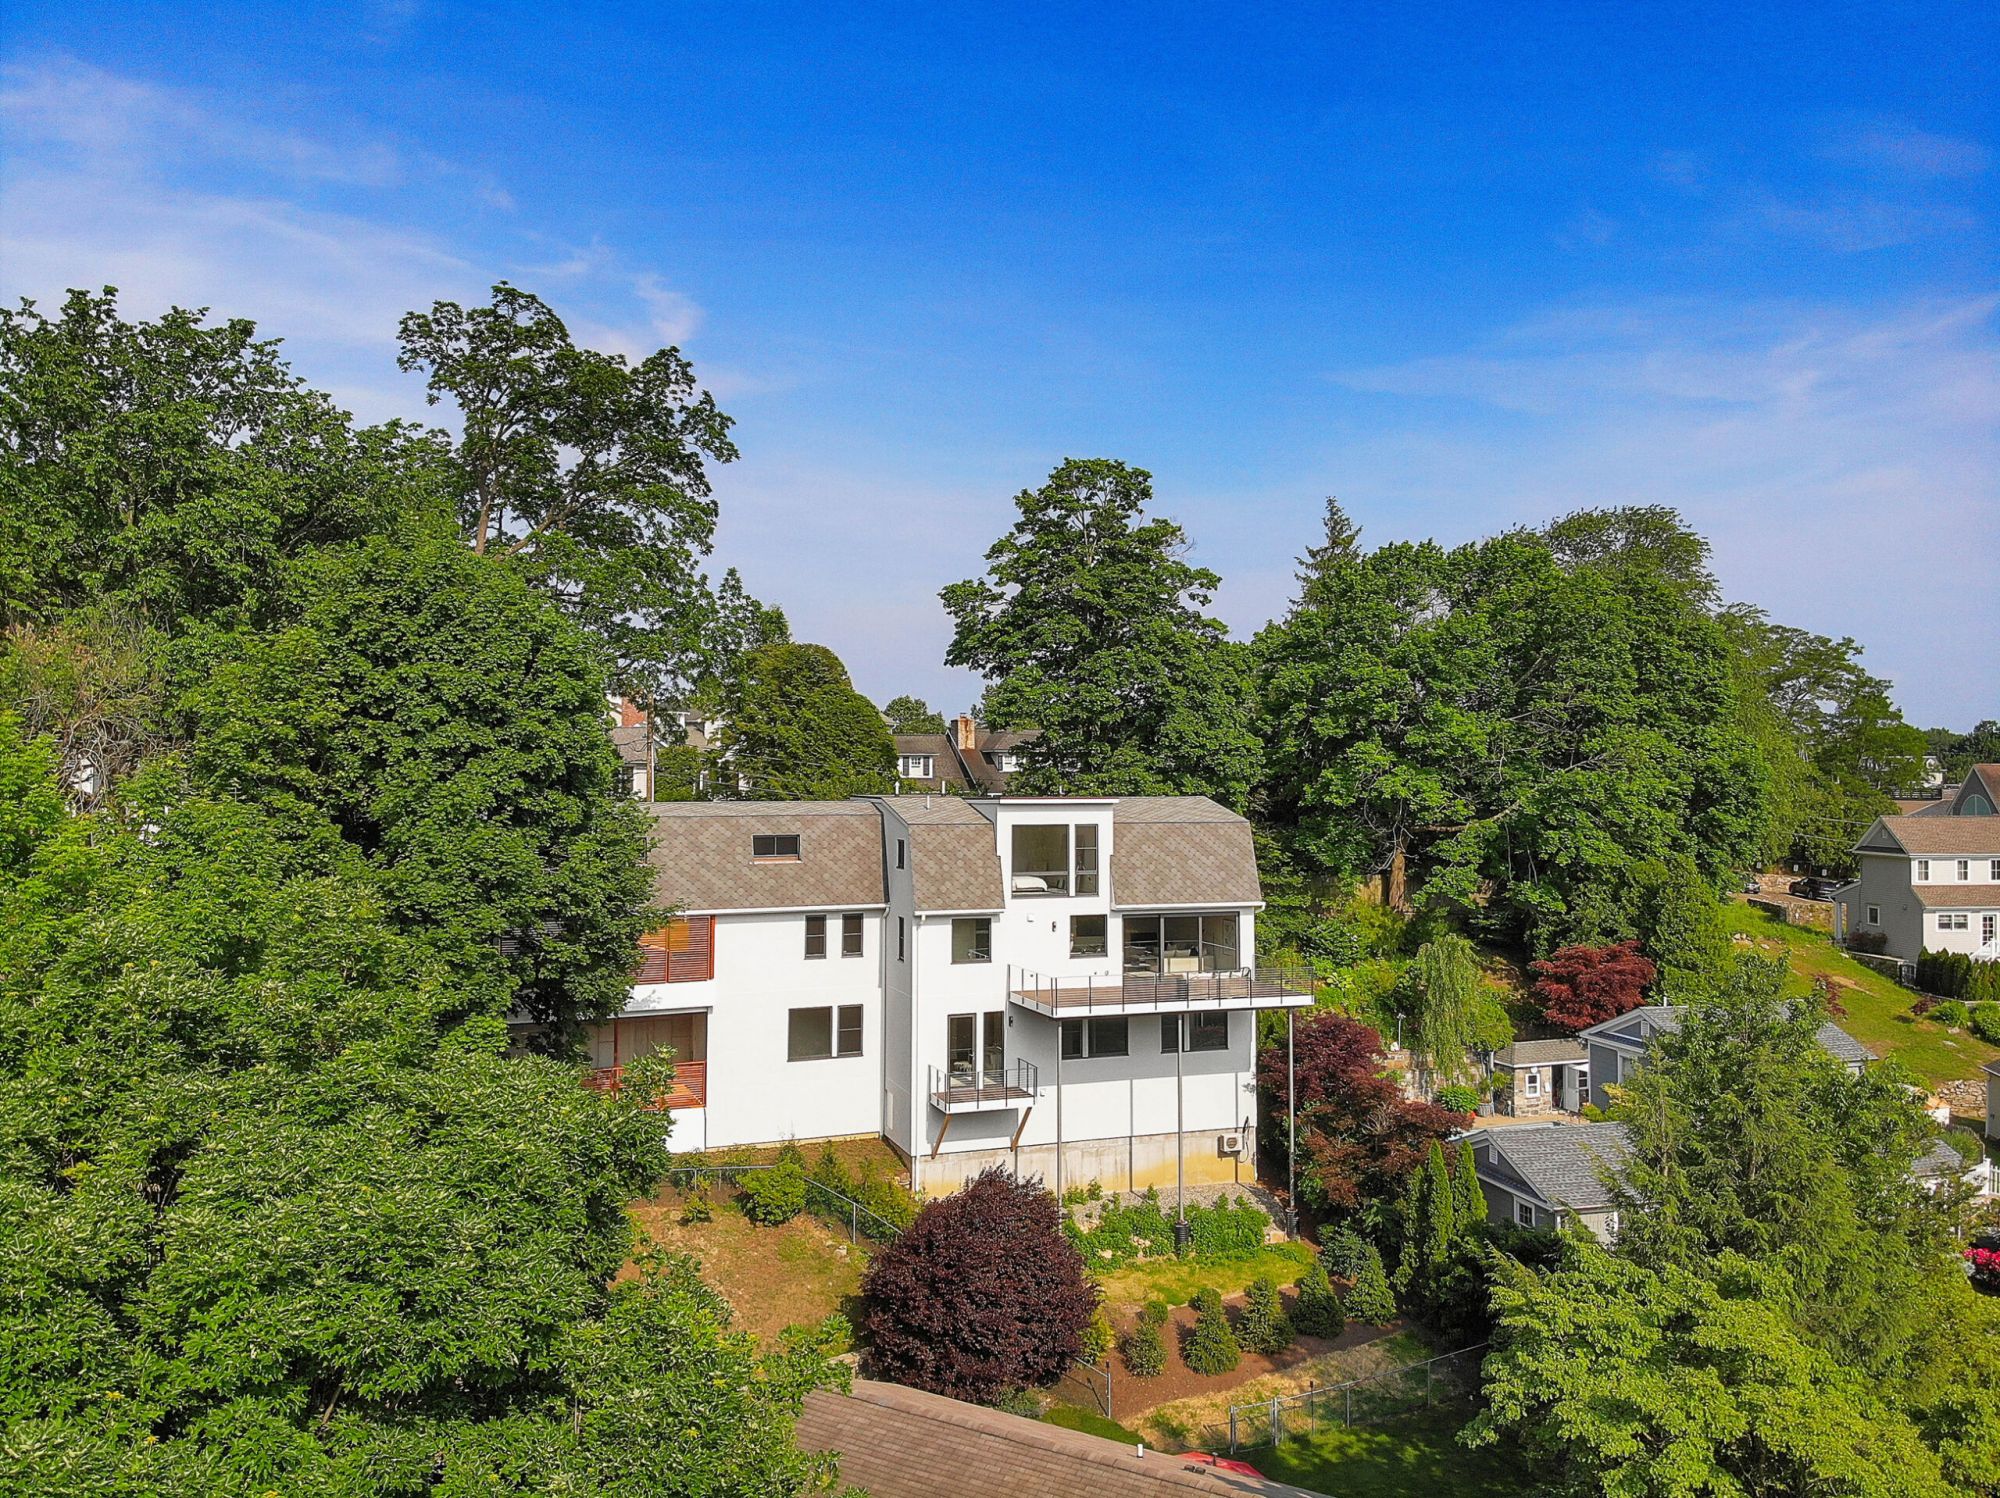 86-new-certified-zero-energy-ready-home-greenwich-ct-